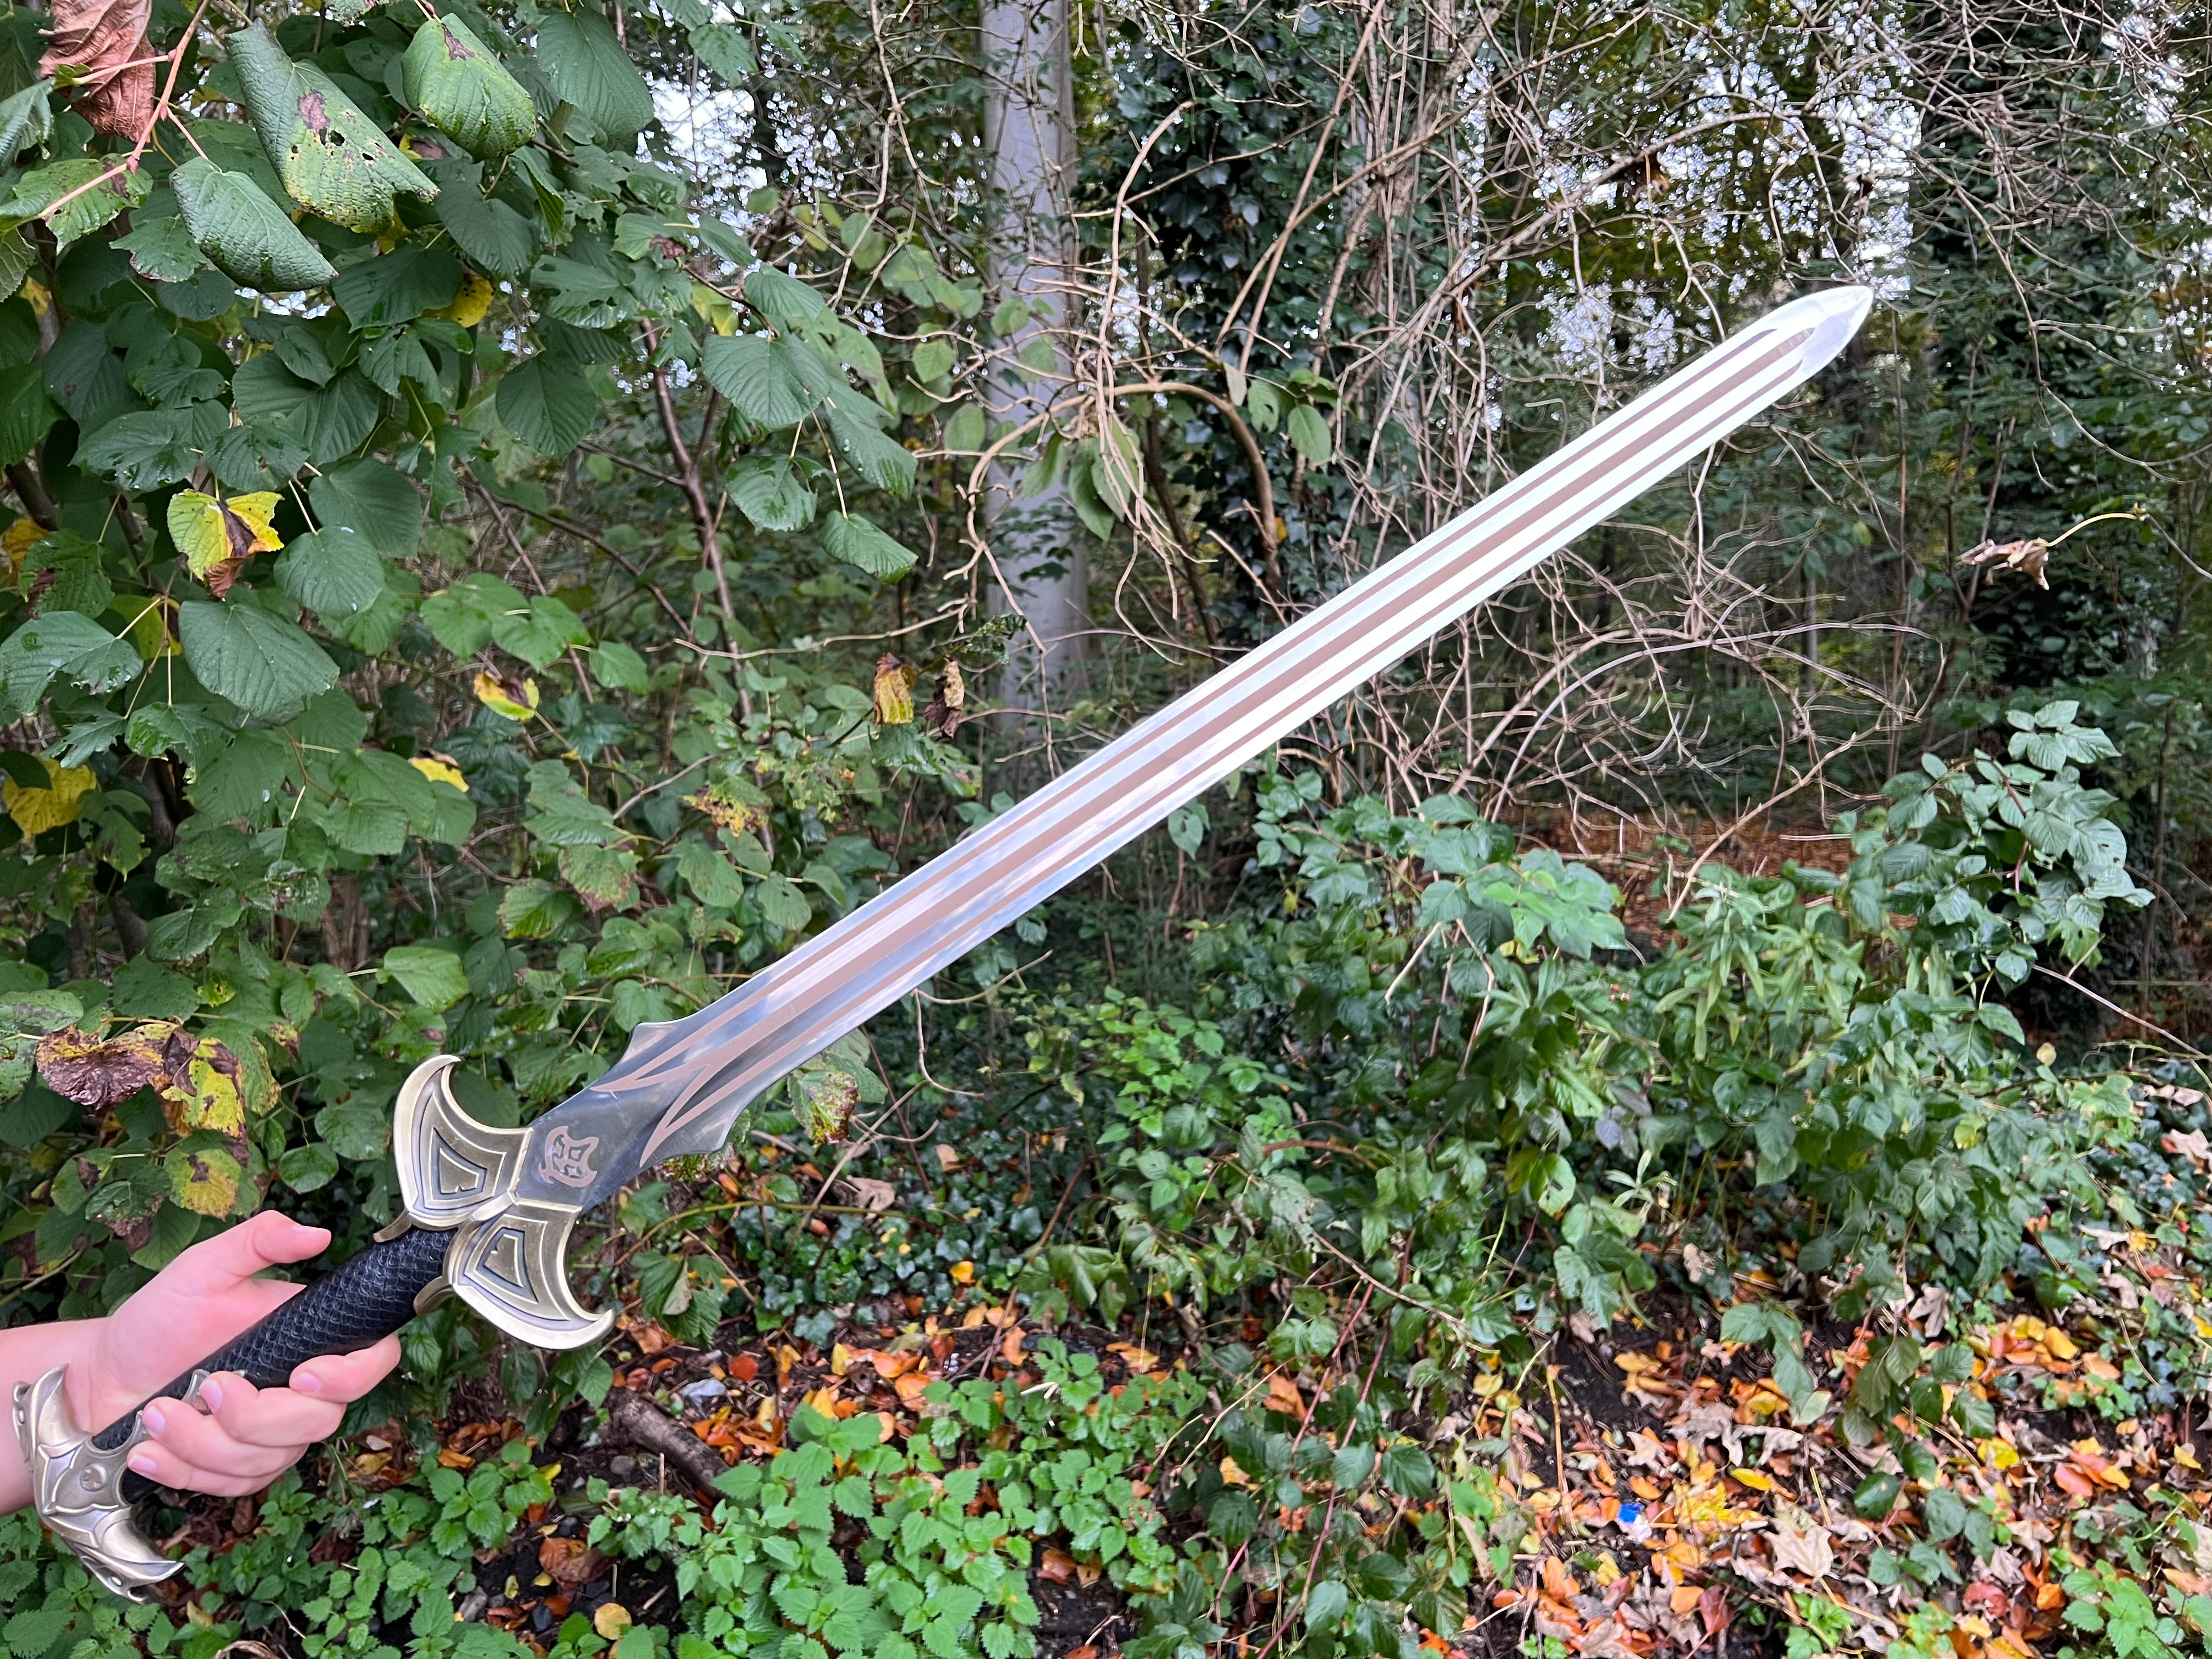 The Sword of Bard the Archer-The Hobbit (including wall holder)